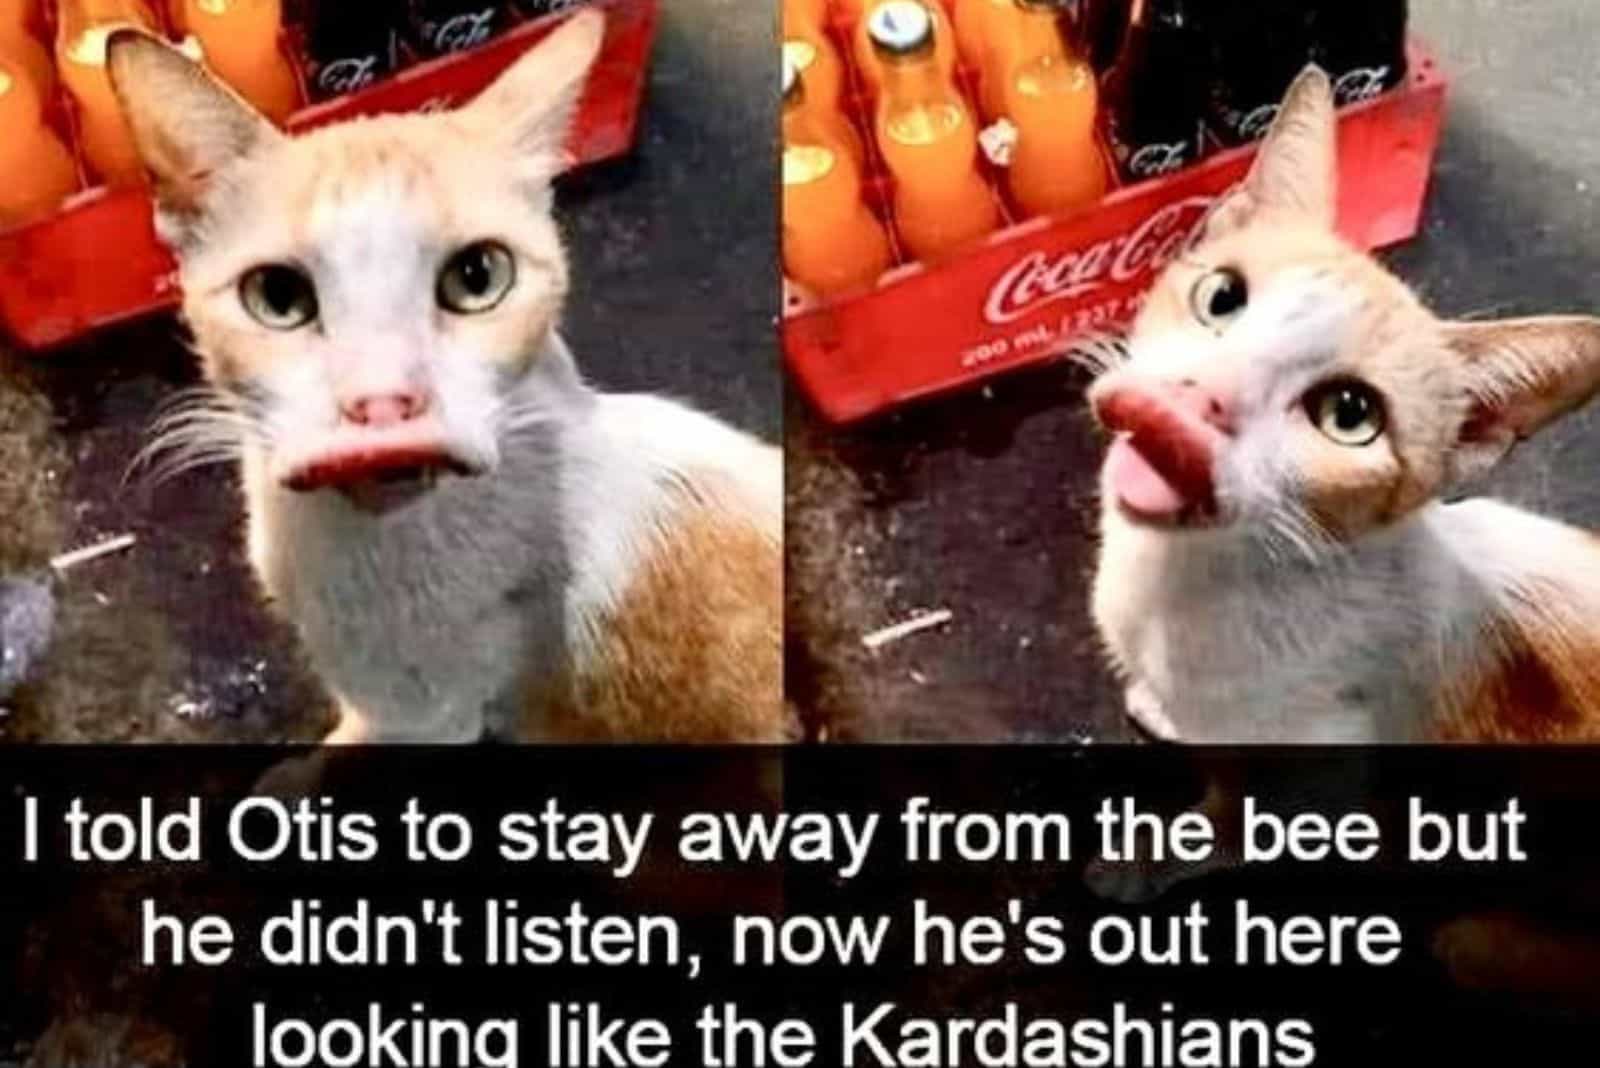 cat named otis with swollen mouth